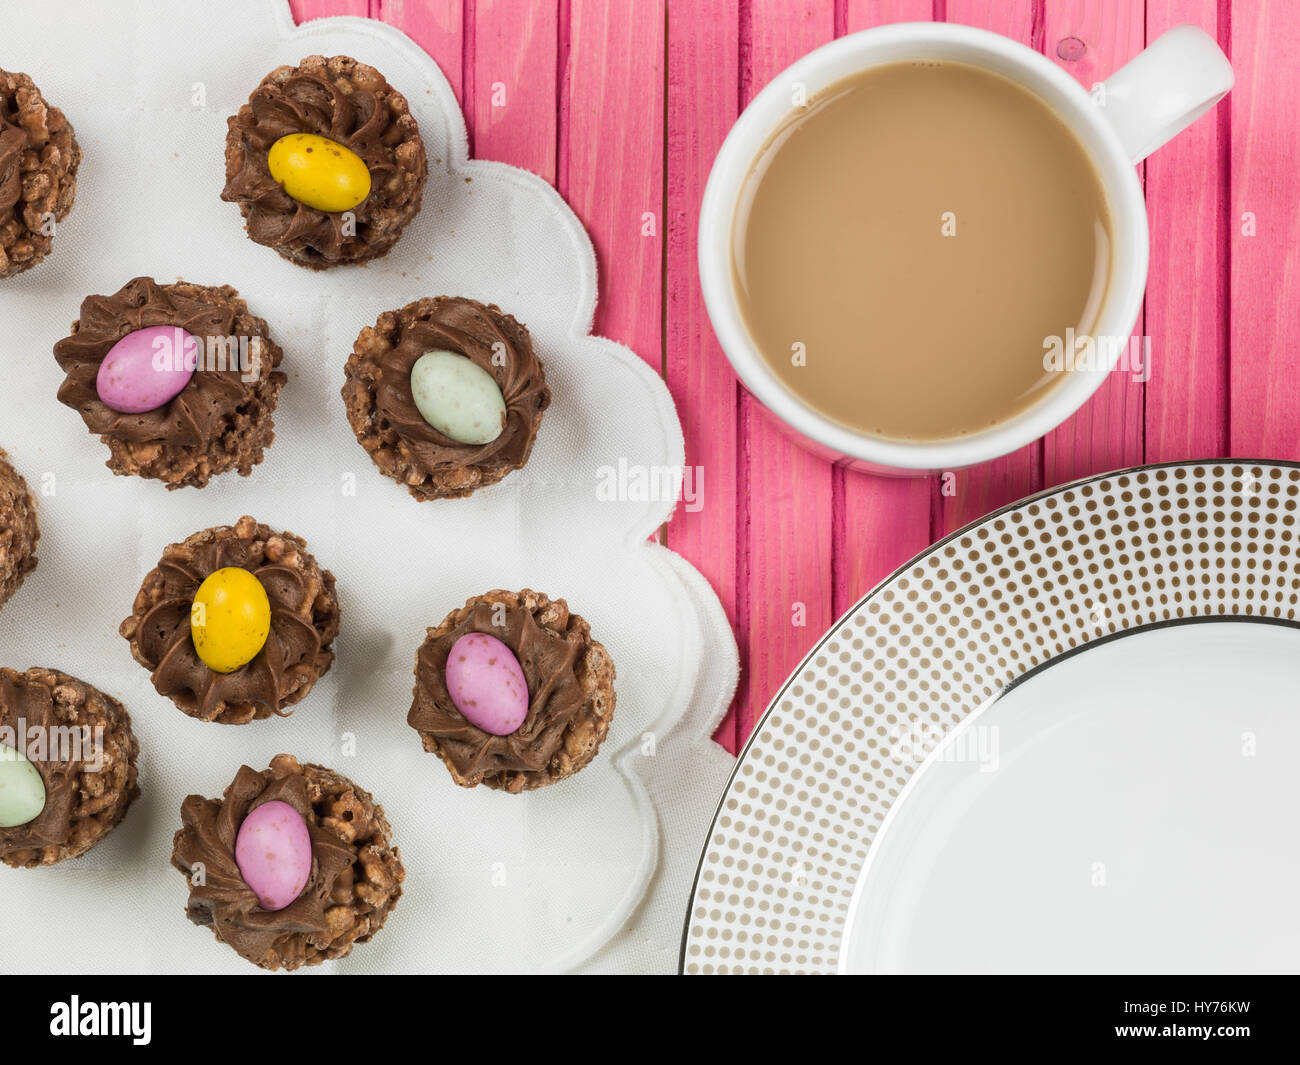 Easter Chocolate Crispy Cereal Nests With Mini Easter Eggs Against a Pink Background Stock Photo